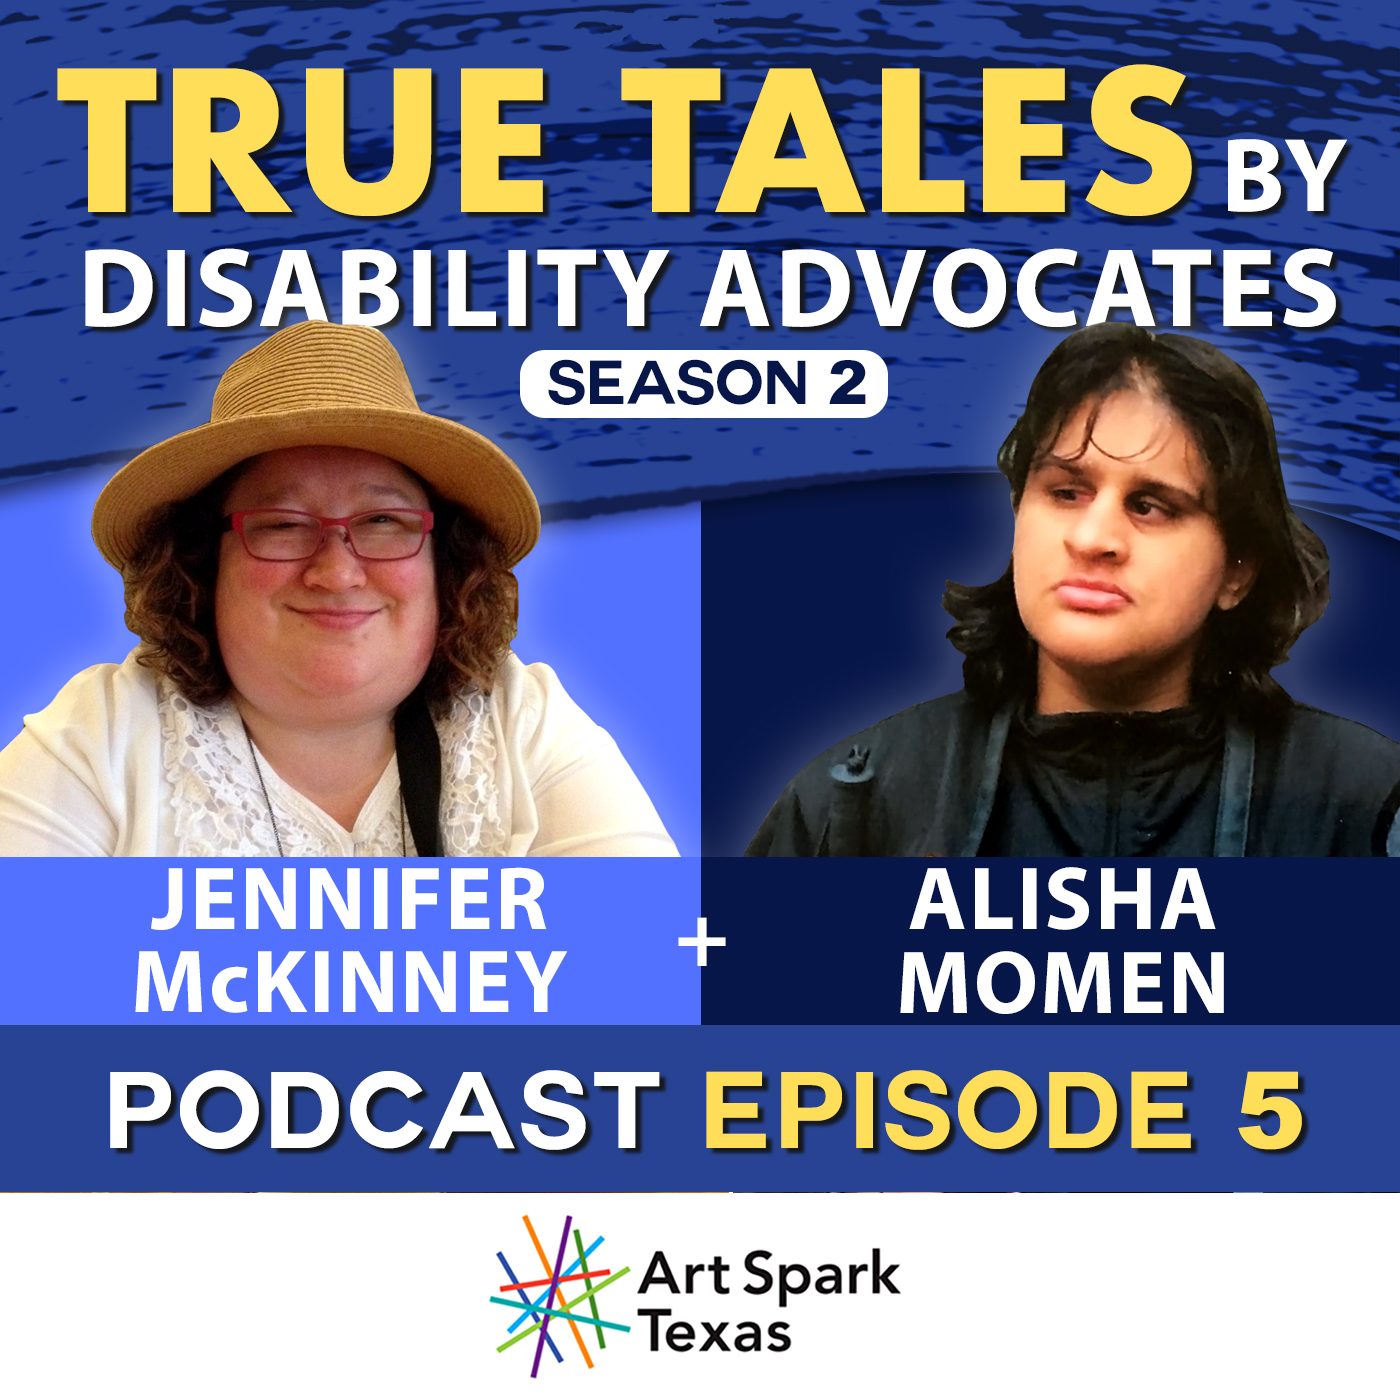 yellow text on a blue background above photos of Jennifer McKinney and Alisha Momen. Text reads, "True tales by disability advocates. Season 2 Episode 5."